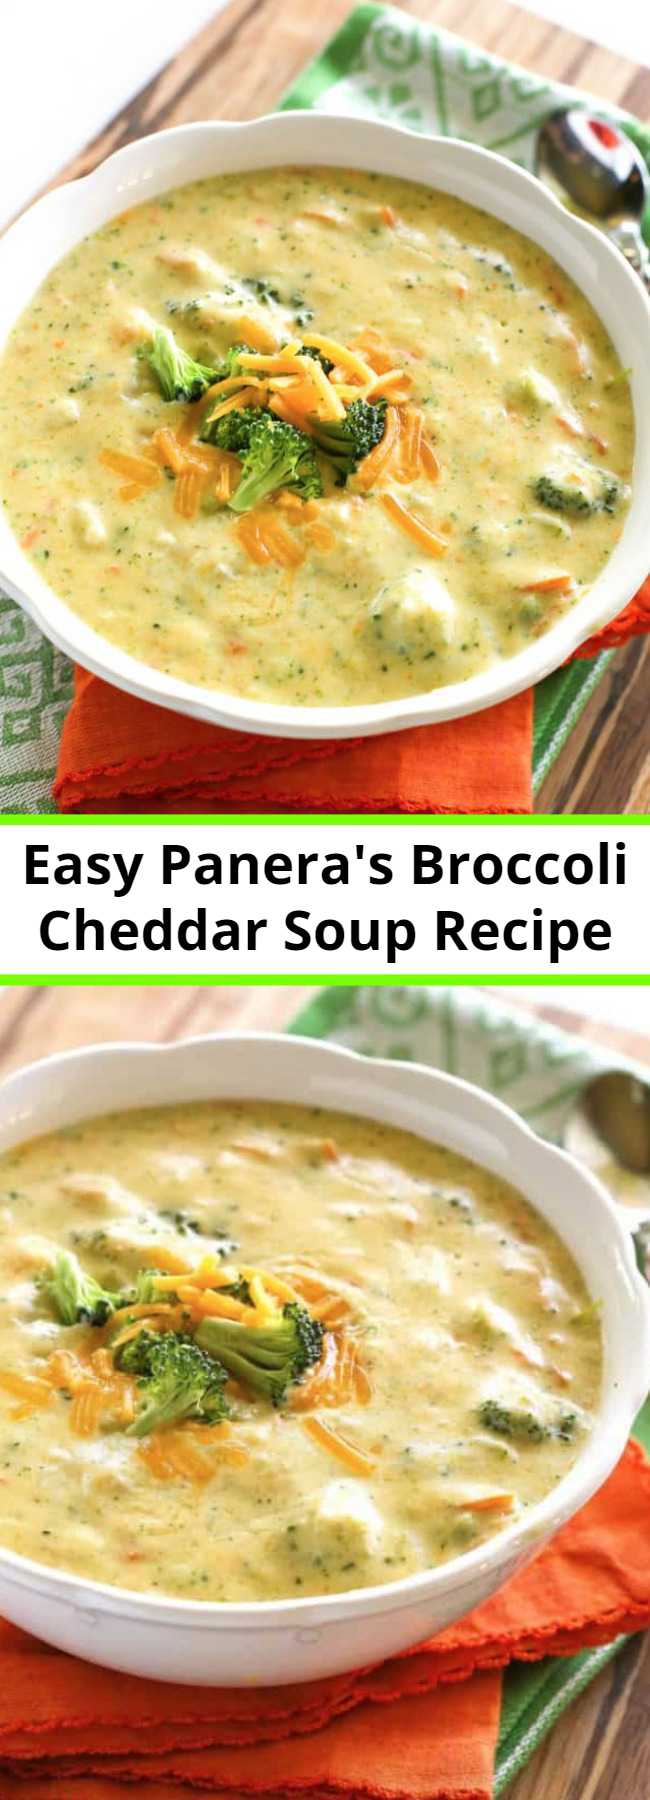 Easy Panera's Broccoli Cheddar Soup Recipe - Creamy broccoli cheddar soup is comfort food at its best and this Panera's Broccoli Cheddar Soup is an easy dinner that hits the spot.